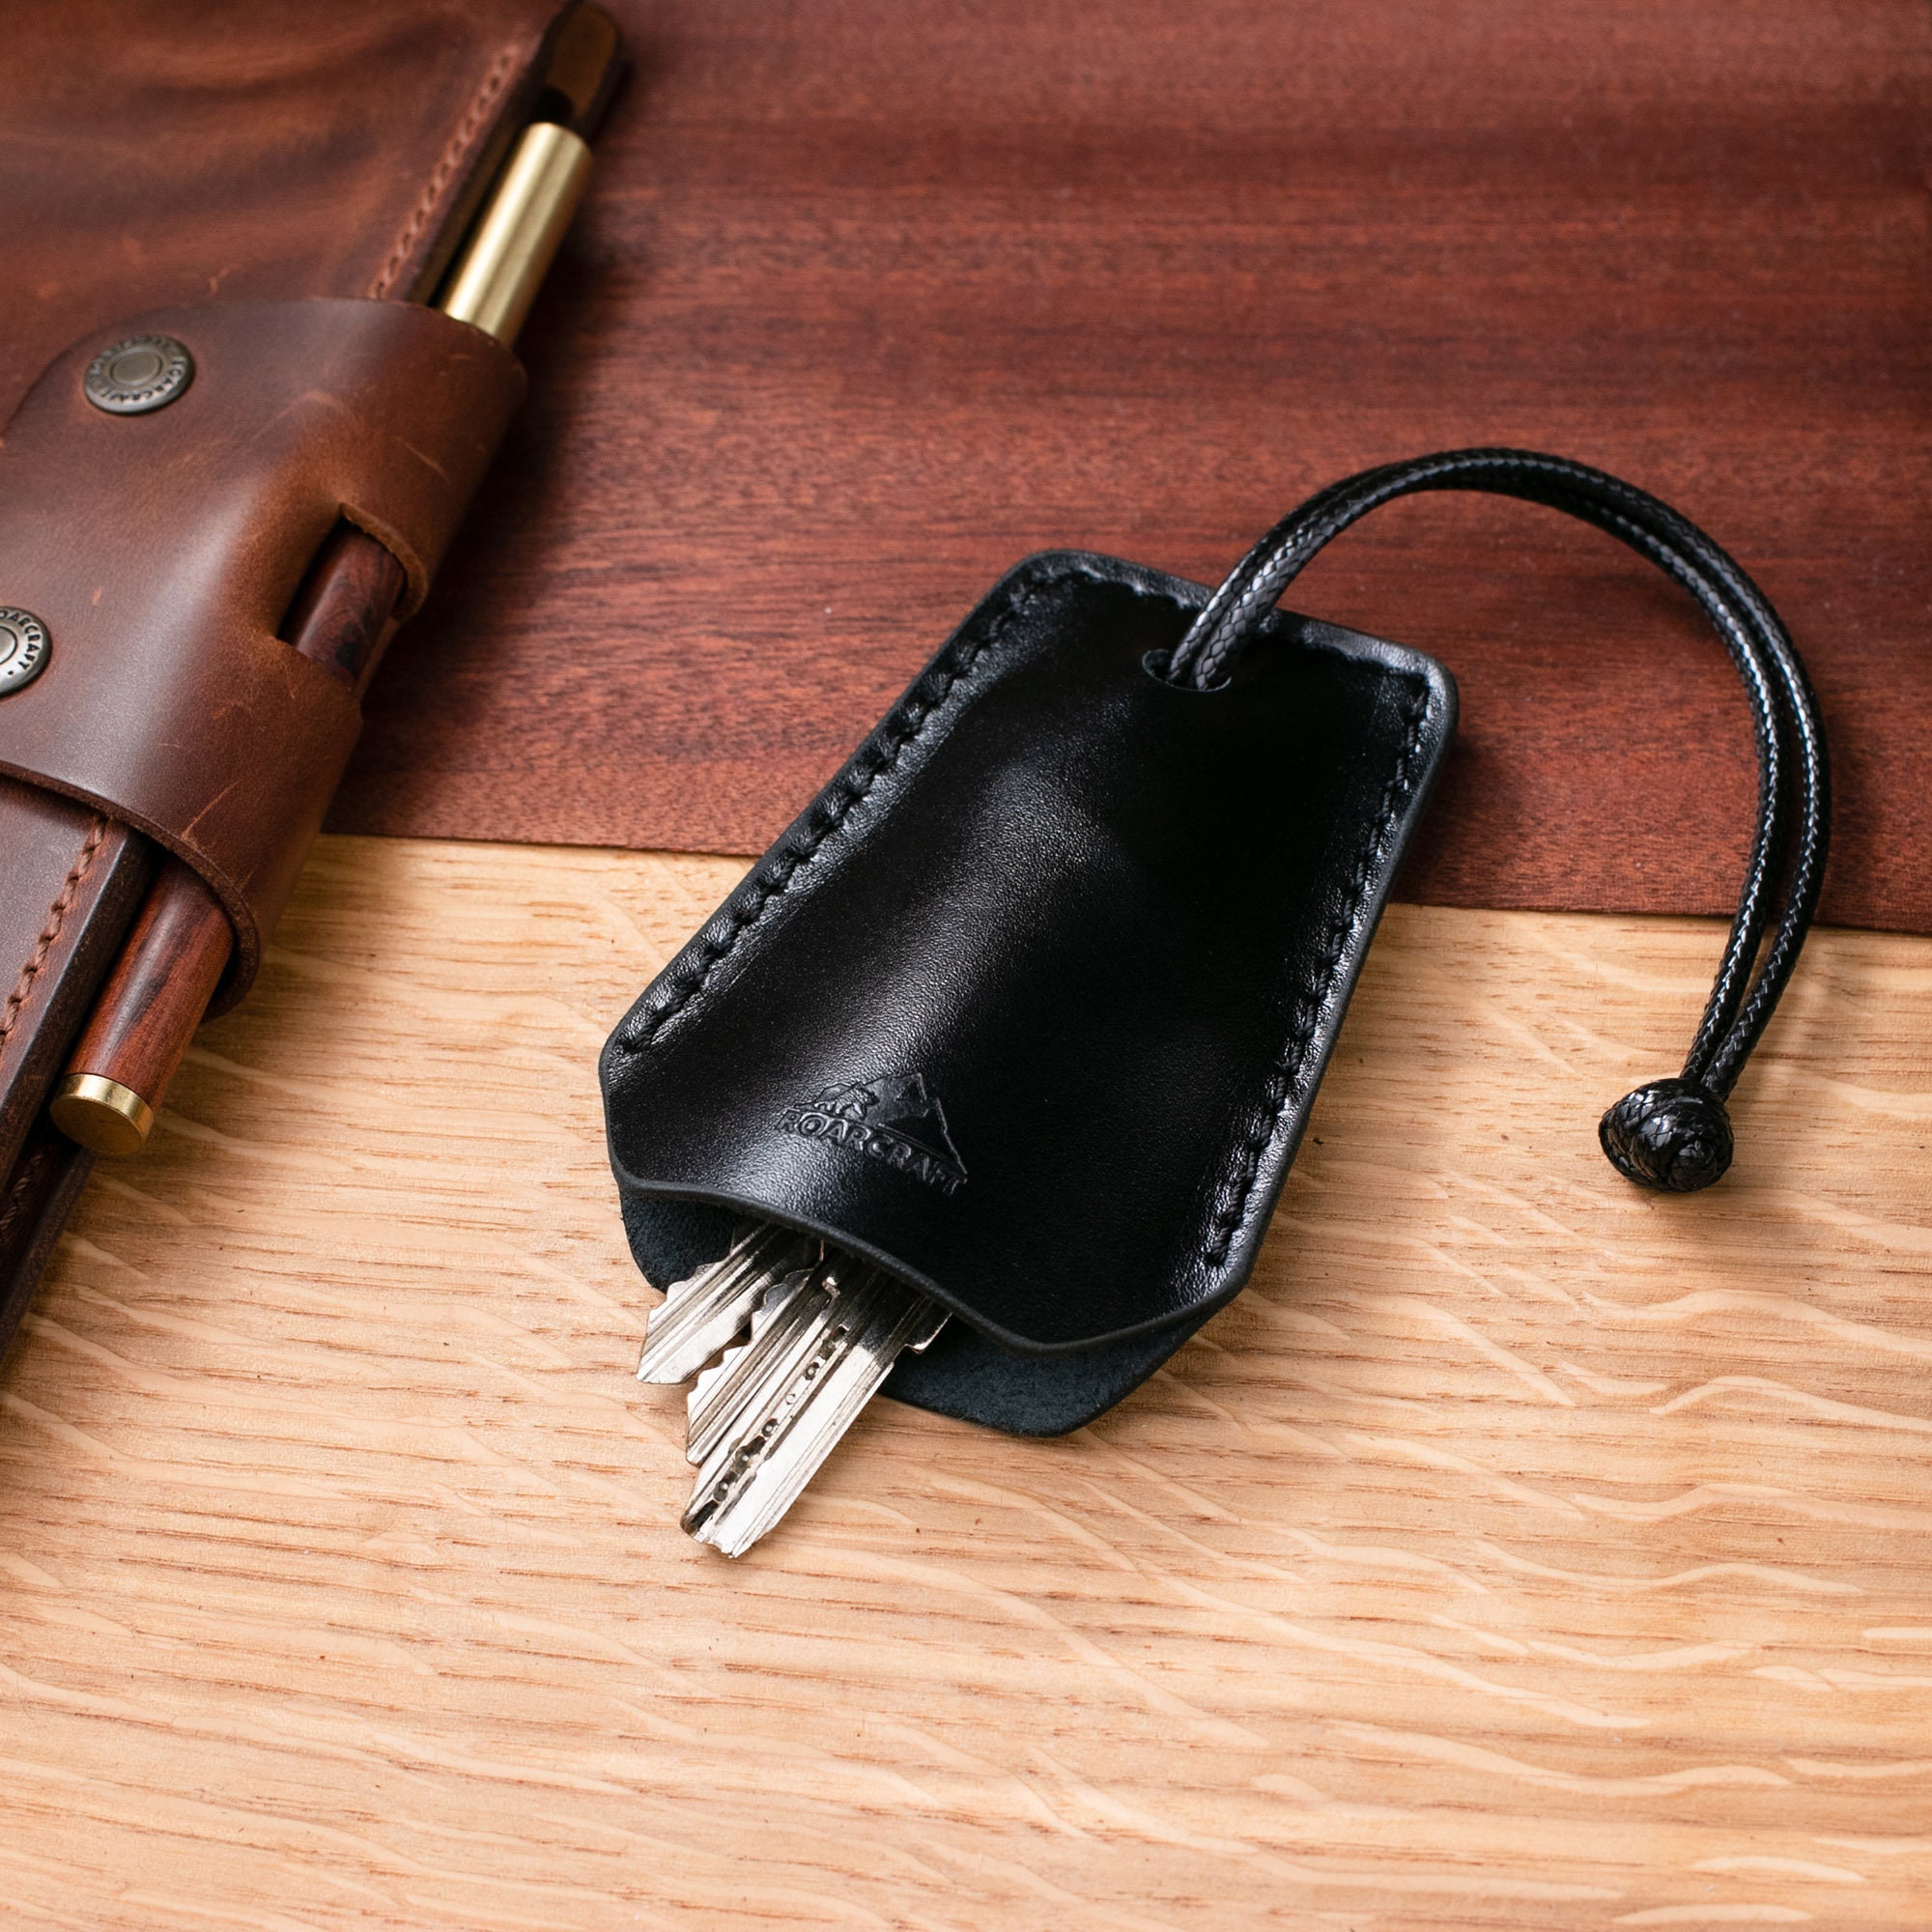 Handmade Leather Key Case Leather Key Holder With Pull Strap Slim